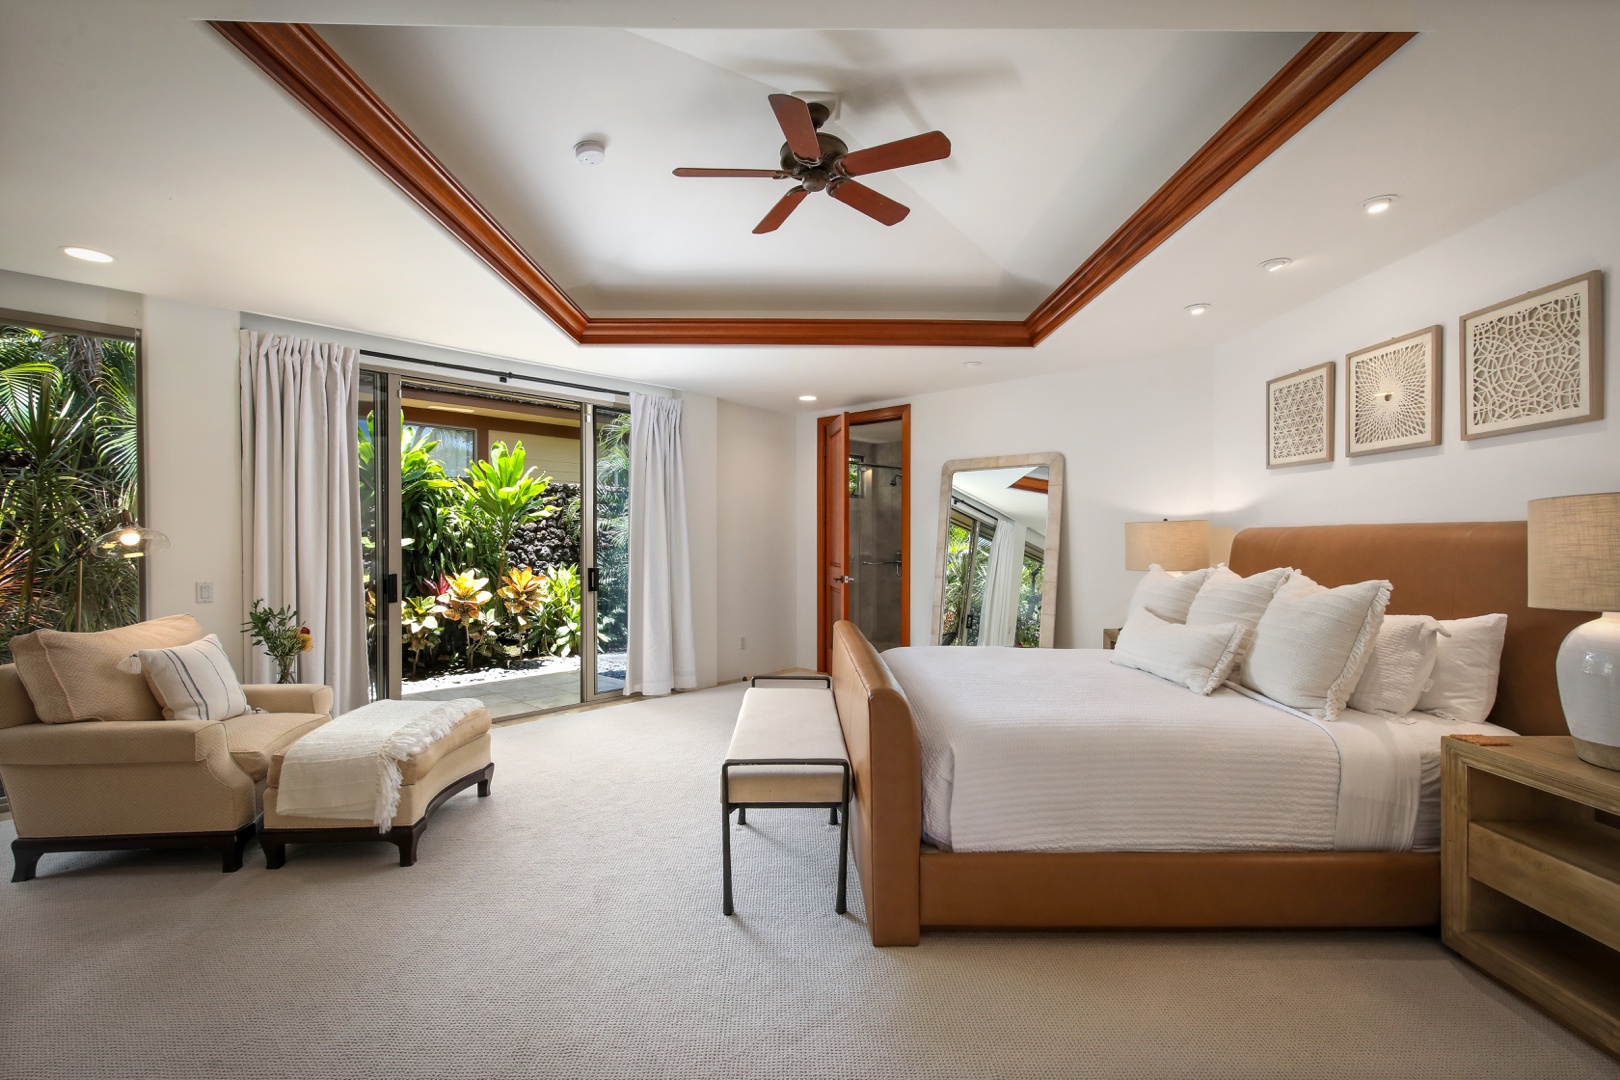 Kailua Kona Vacation Rentals, 4BD Pakui Street (147) Estate Home at Four Seasons Resort at Hualalai - Reverse view of primary suite with valence ceiling and stunning natural light.